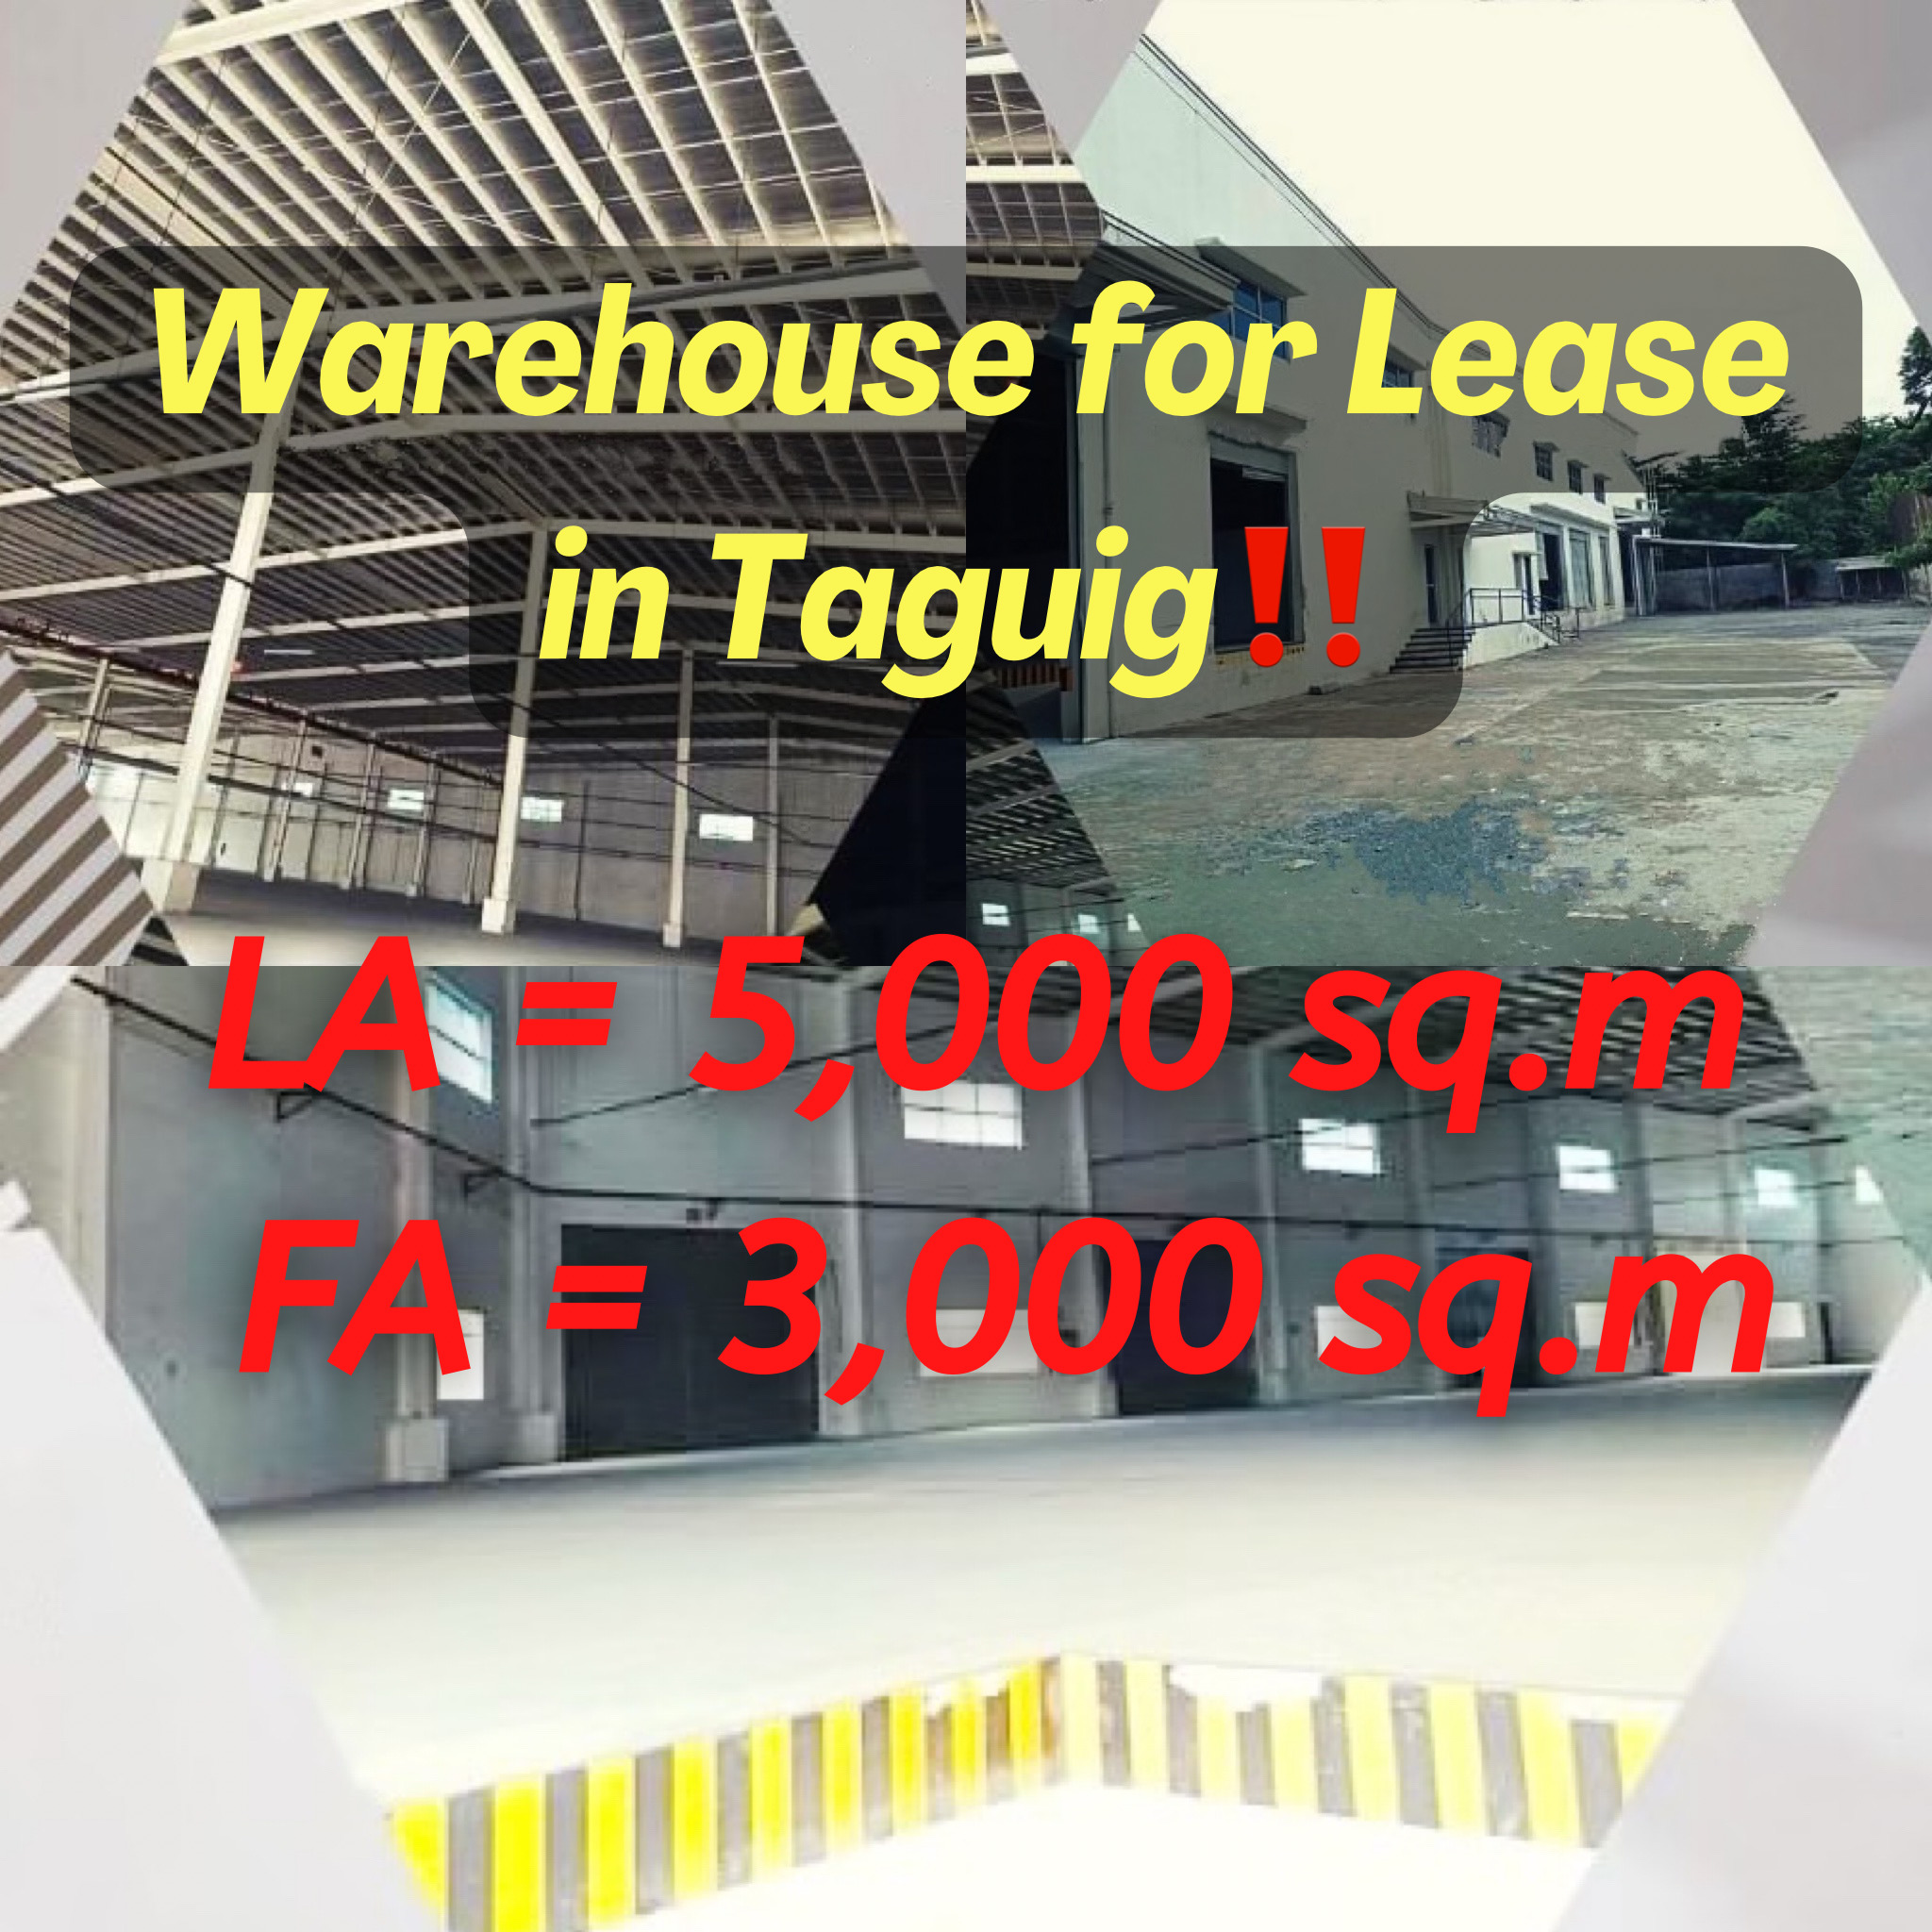 Warehouse for Lease in Levi Mariano, Taguig‼️